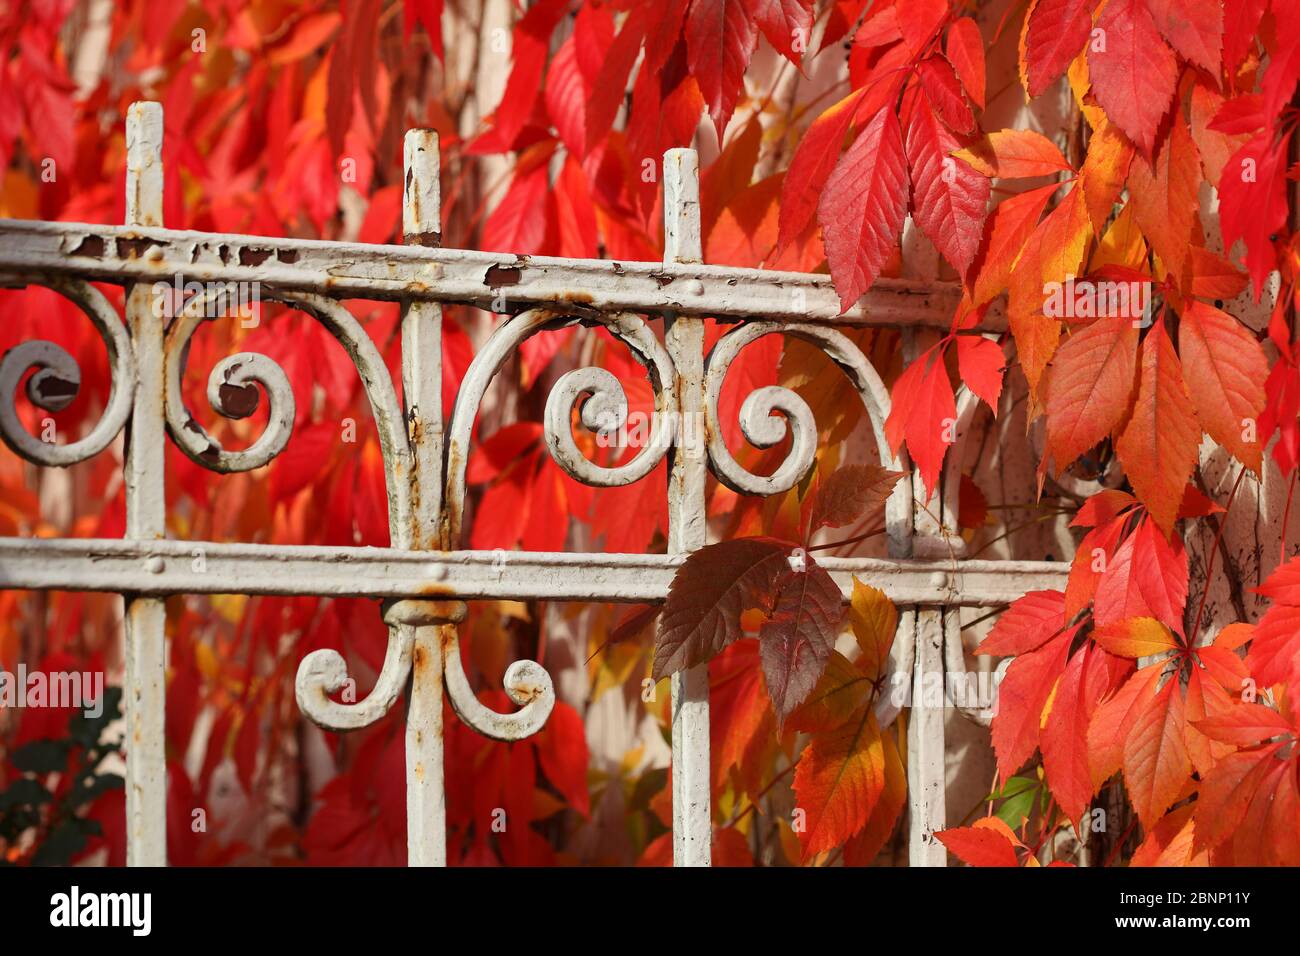 Red discolored leaves of wild wine (Vitis vinifera Subsp Sylvestris) with old decorated garden fence in autumn, Germany Stock Photo